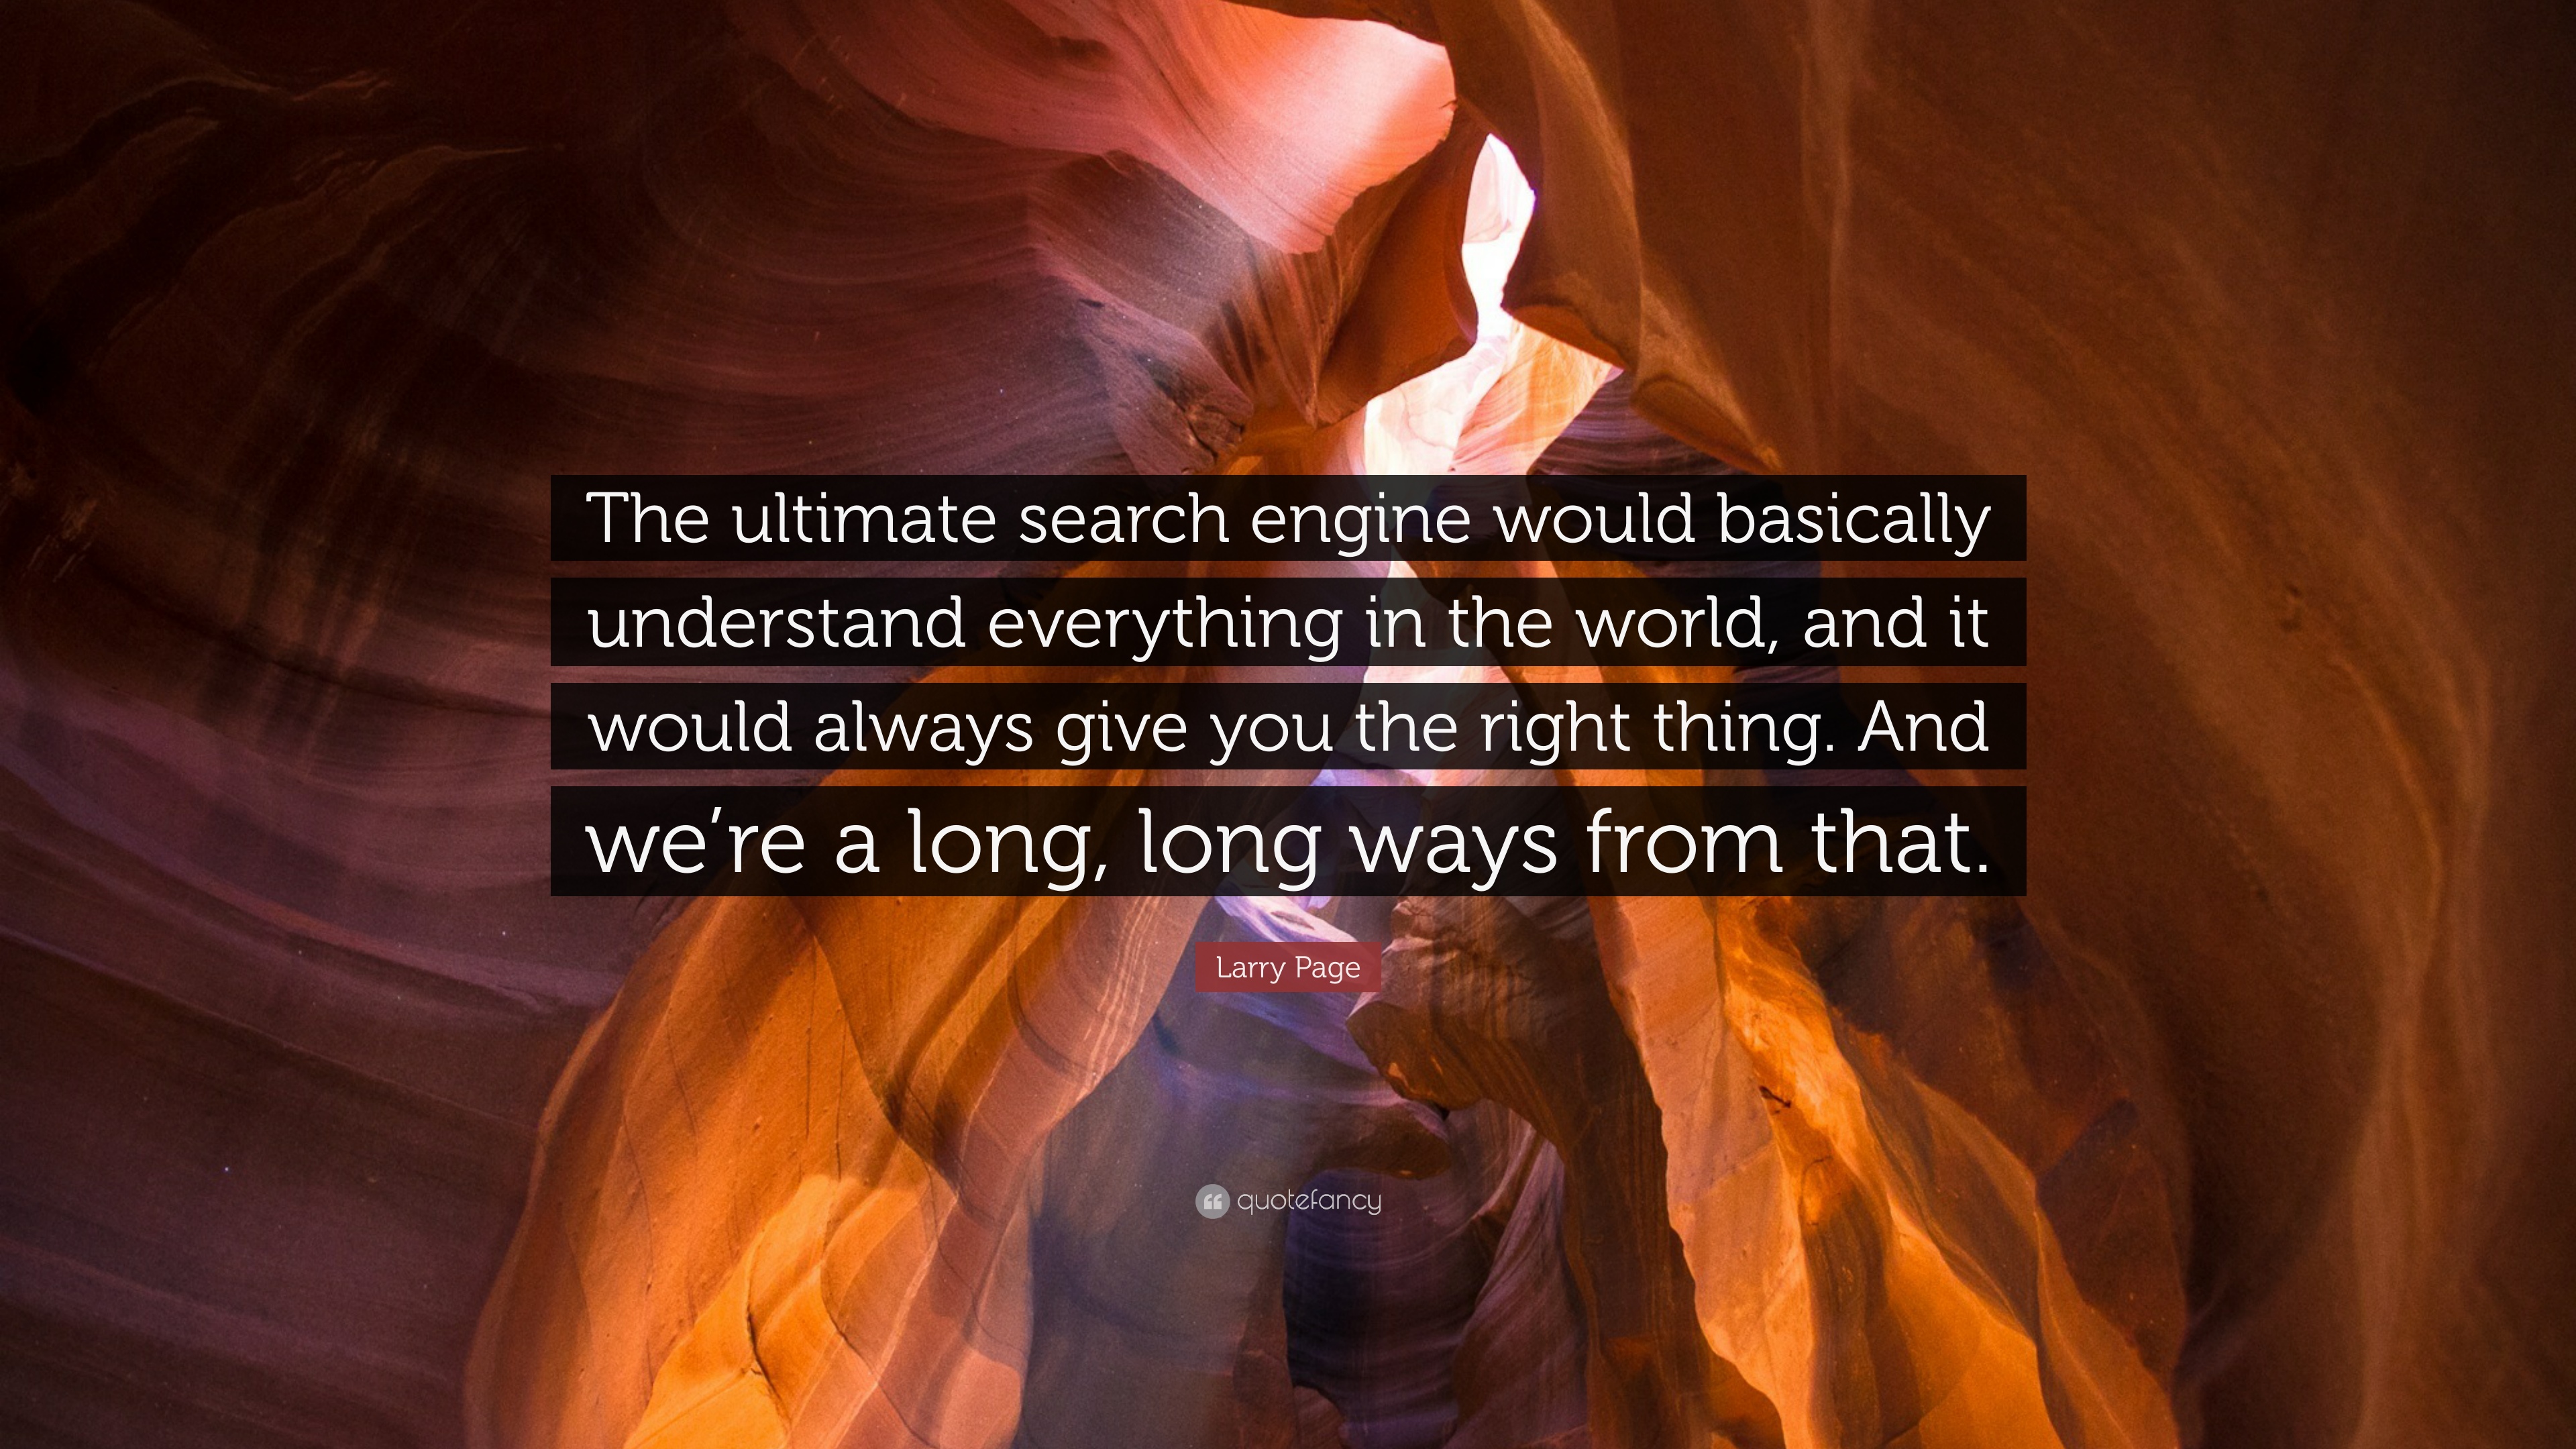 Larry Page Quote: “The ultimate search engine would basically